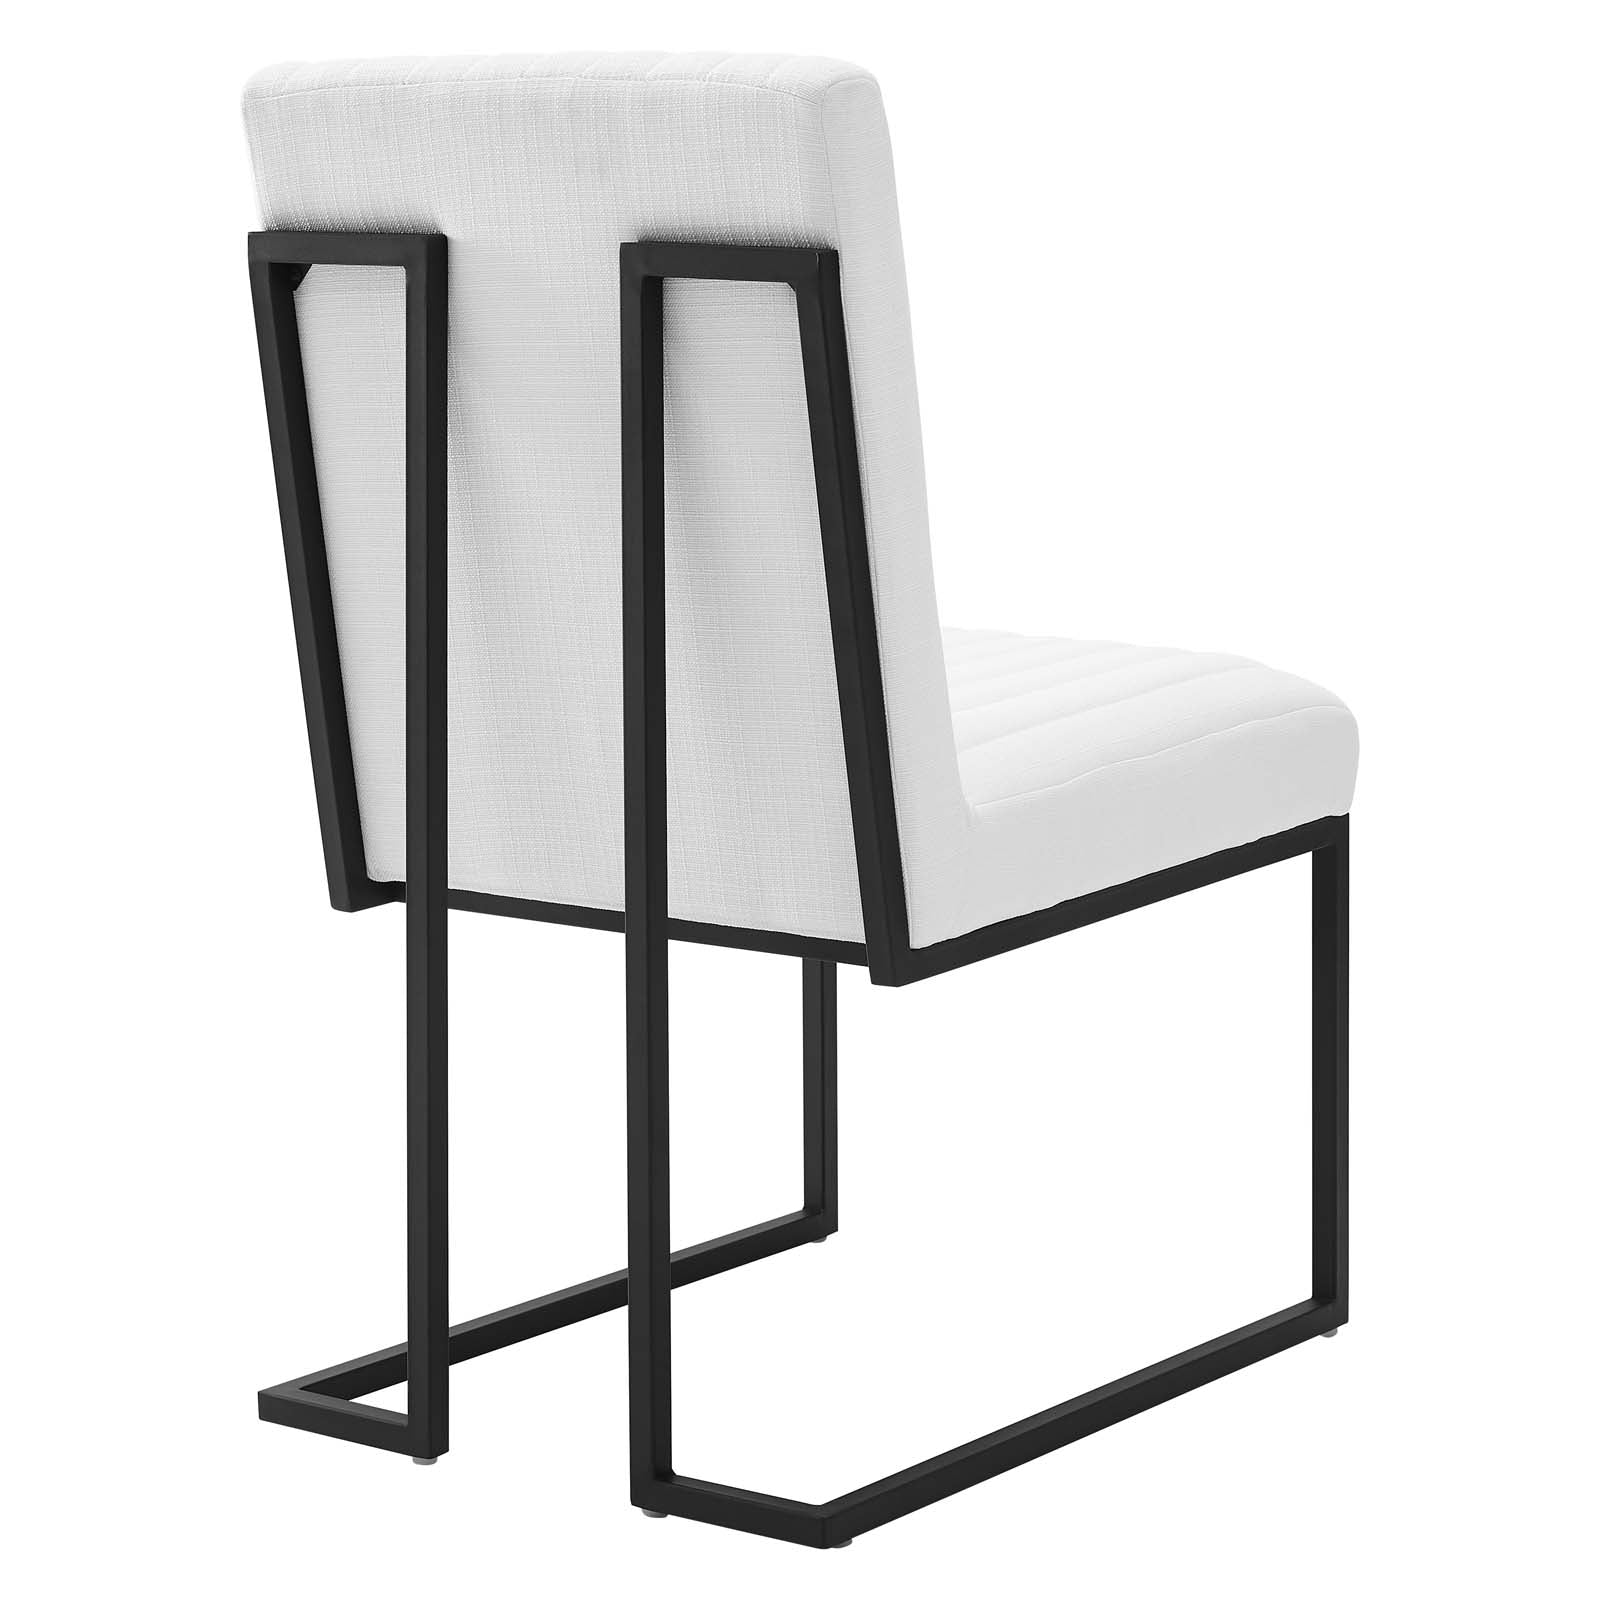 Modway Dining Chairs - Indulge Channel Tufted Fabric Dining Chair White